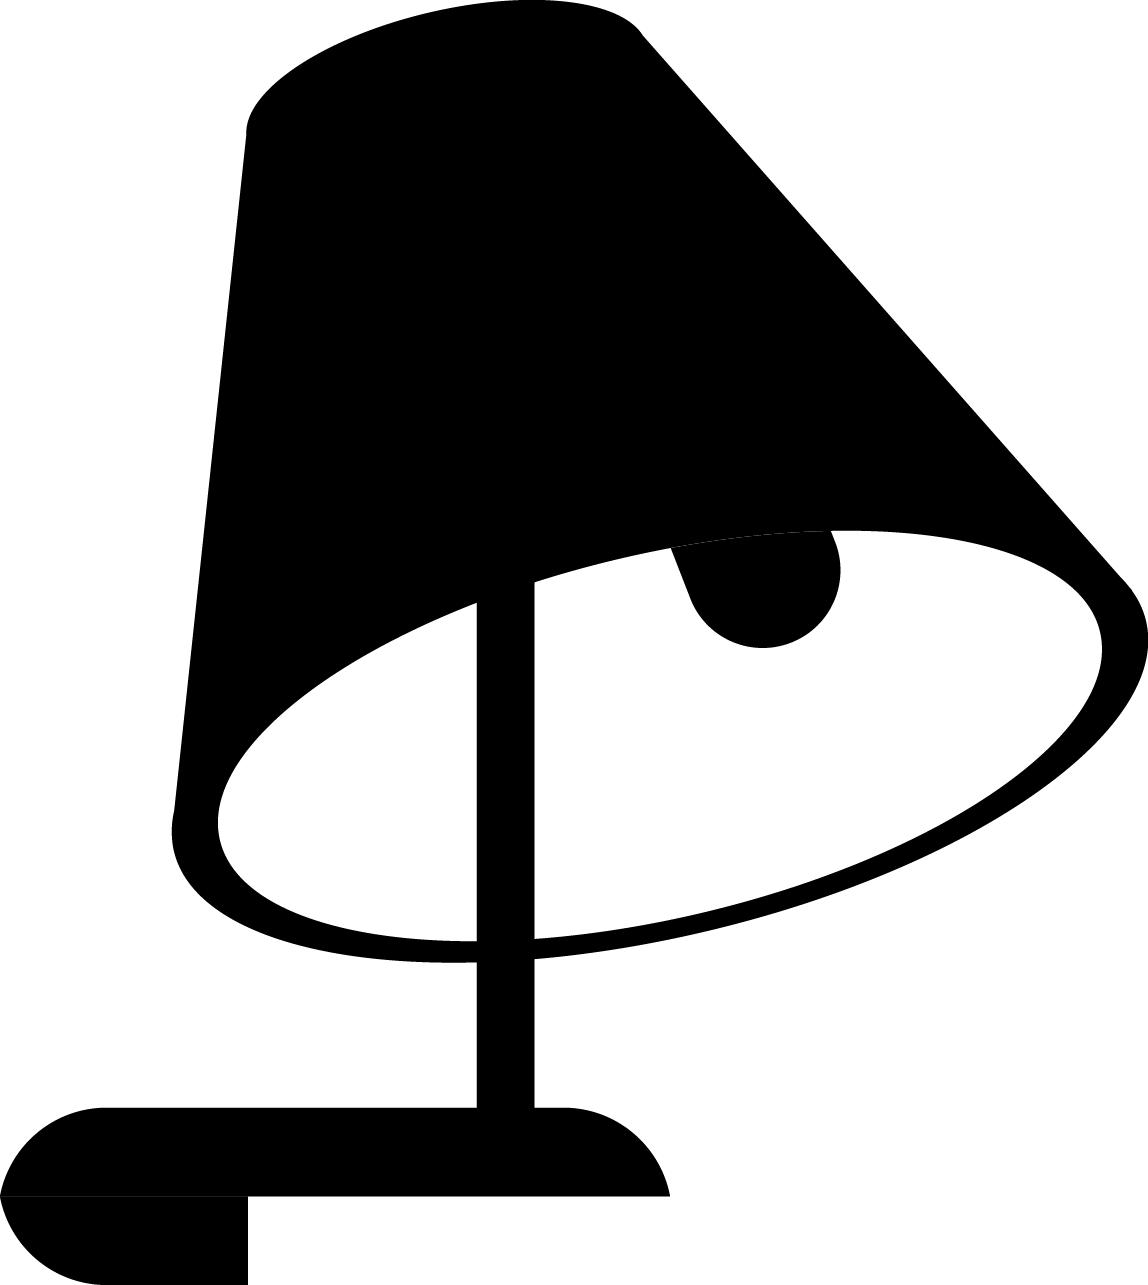 Lamp Silhouette png